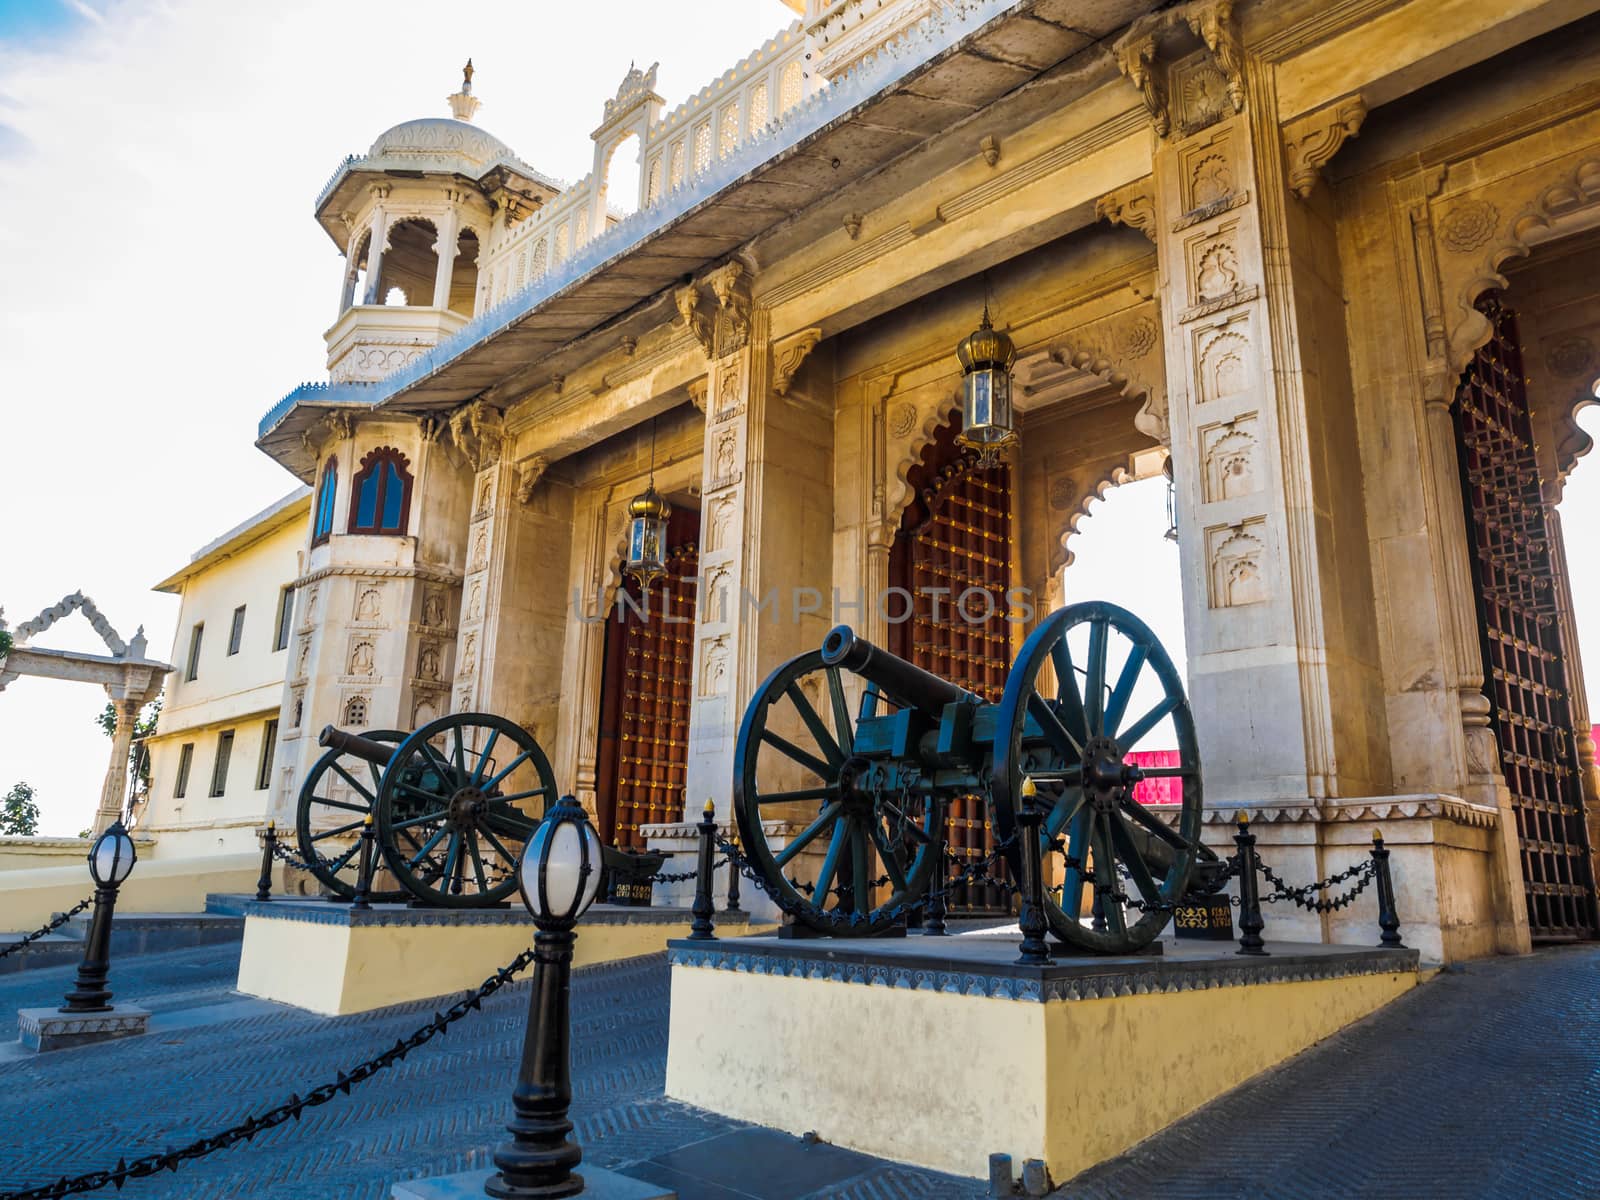 Gate of City Palace in Udaipur by takepicsforfun